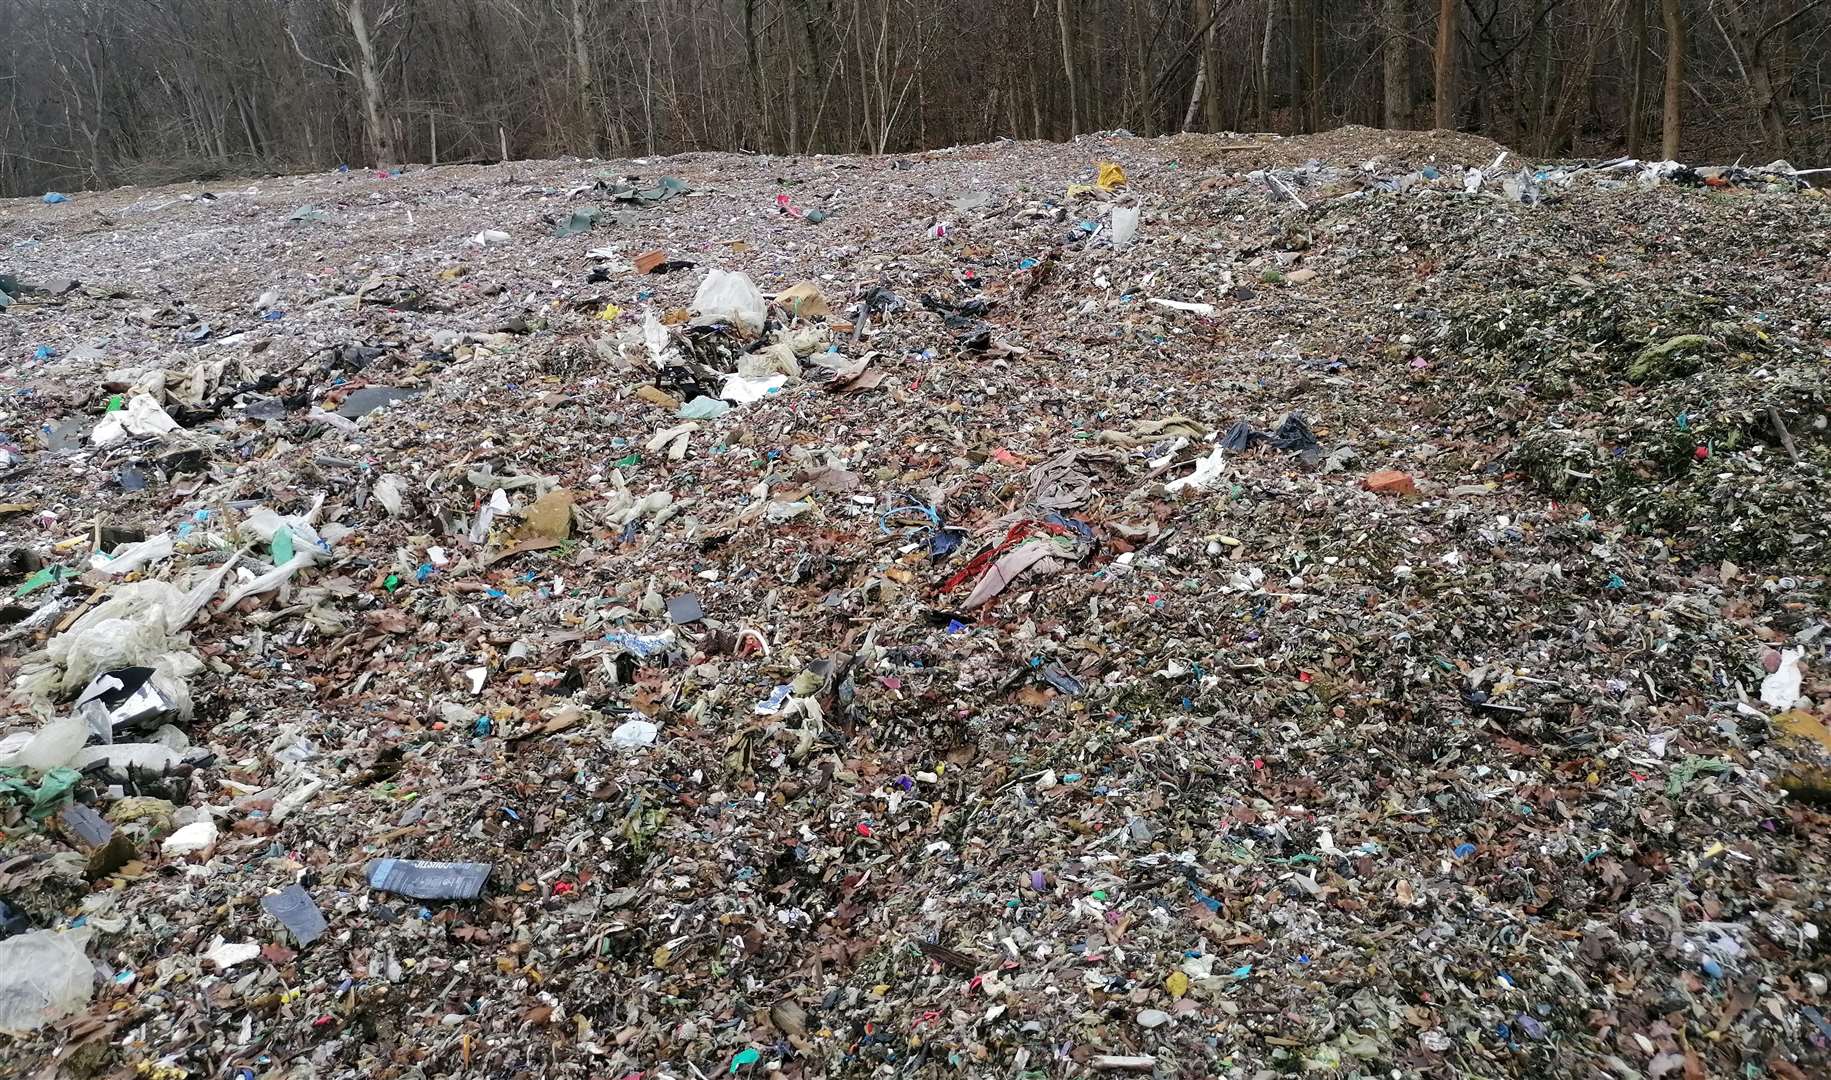 Rubbish is piled 12ft high across acres of Hoad's Wood, near Ashford